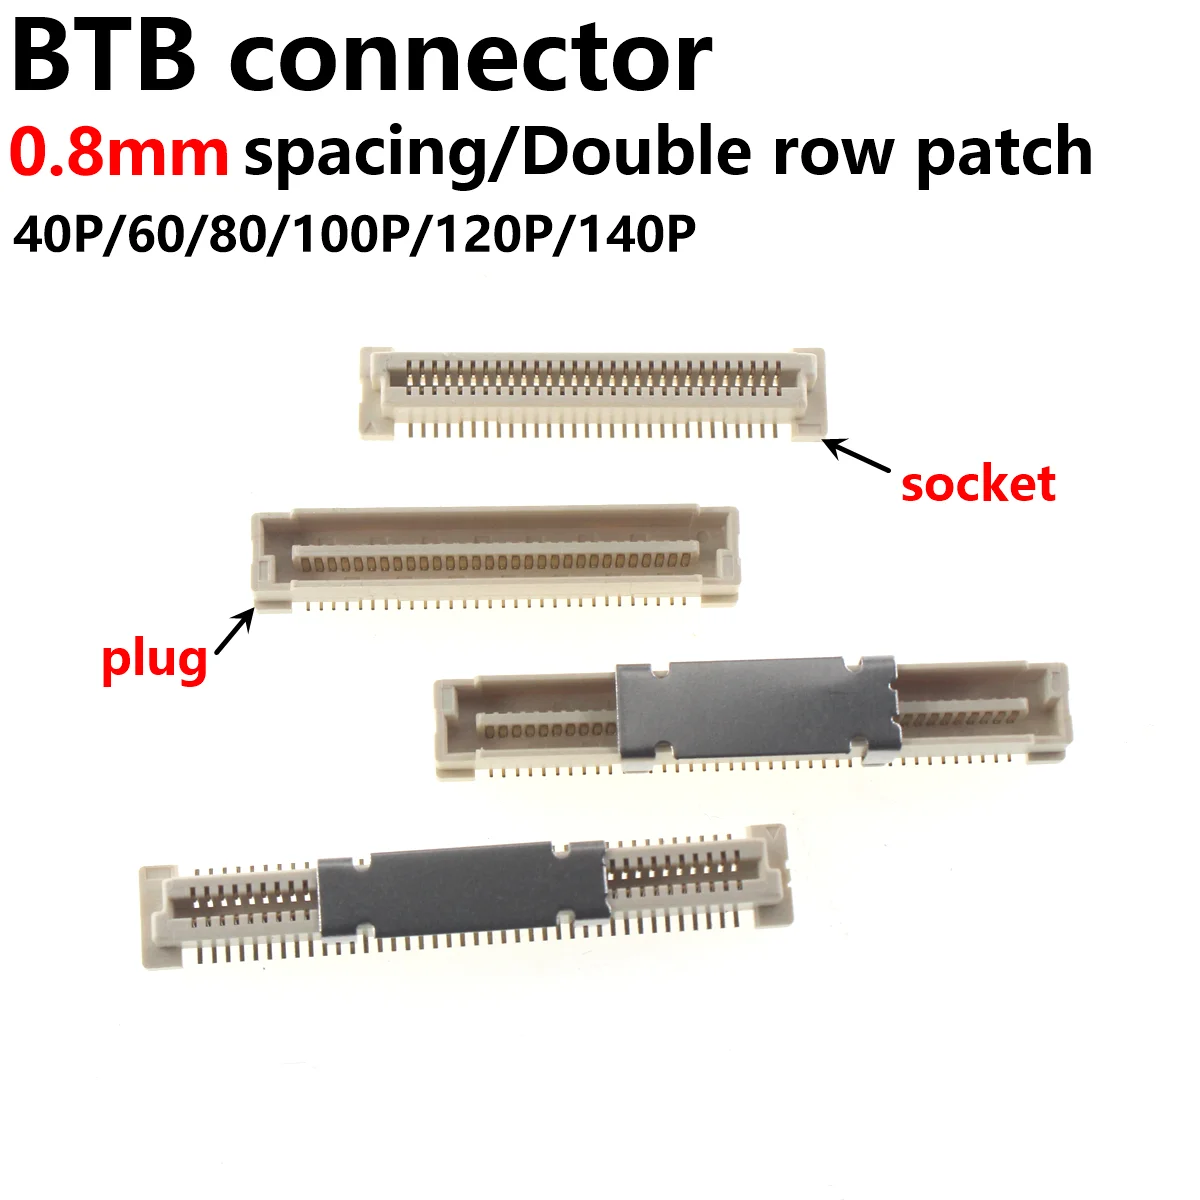 2SETS SOCKET AND PLUG 1SETS 0.8mm pitch board to double row patch BTB connector 40P/60/80/100P/120P/140P